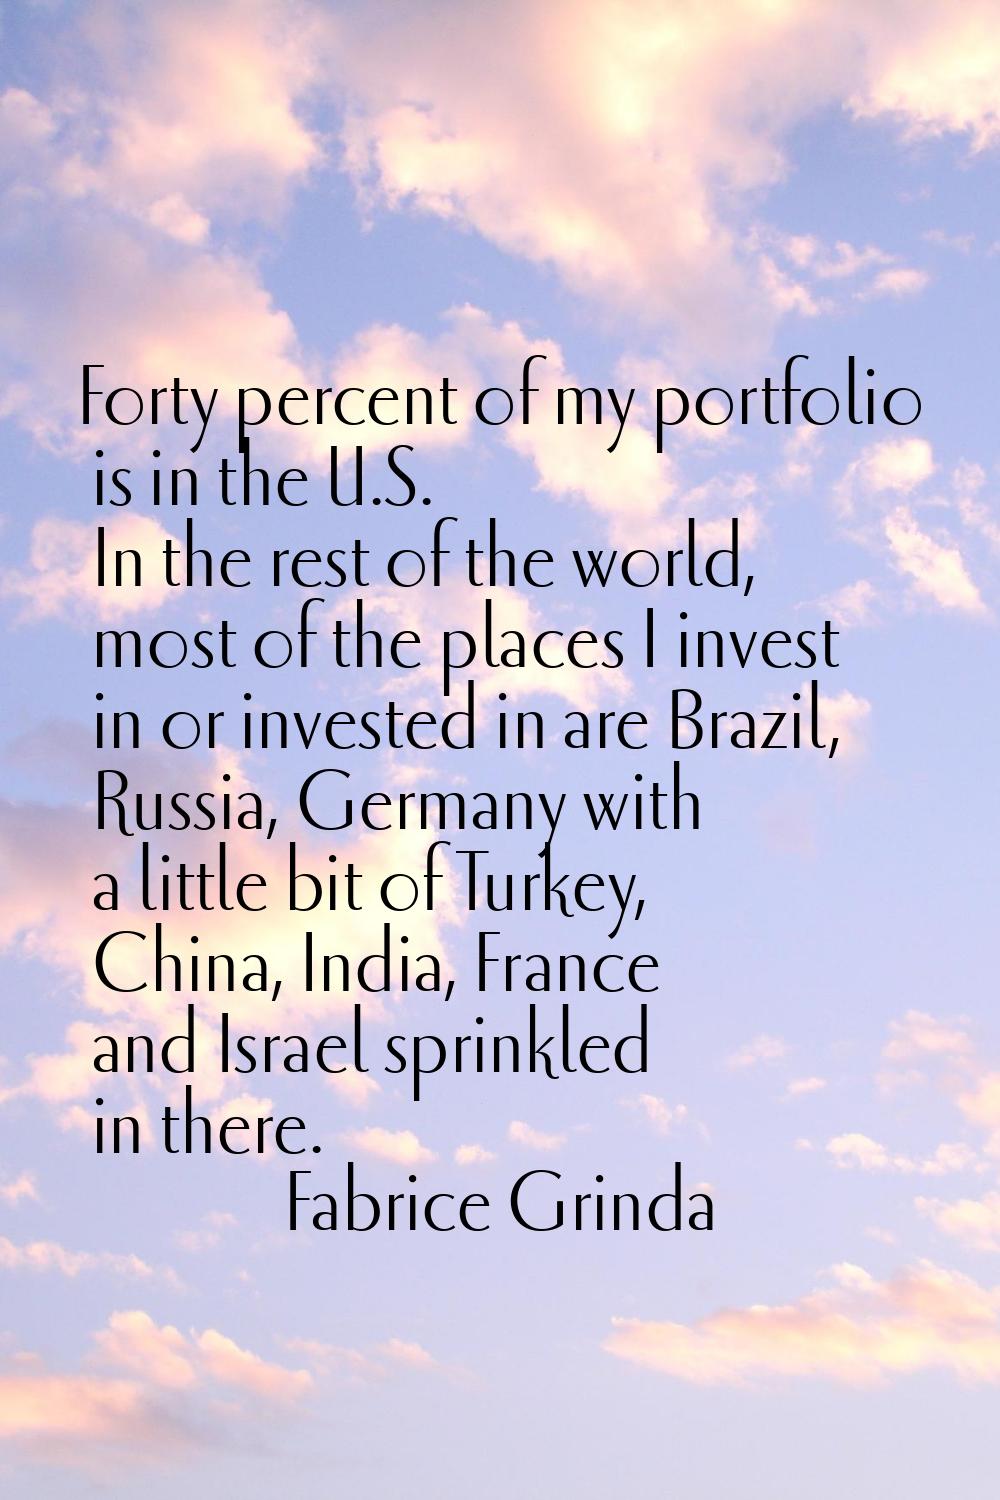 Forty percent of my portfolio is in the U.S. In the rest of the world, most of the places I invest 